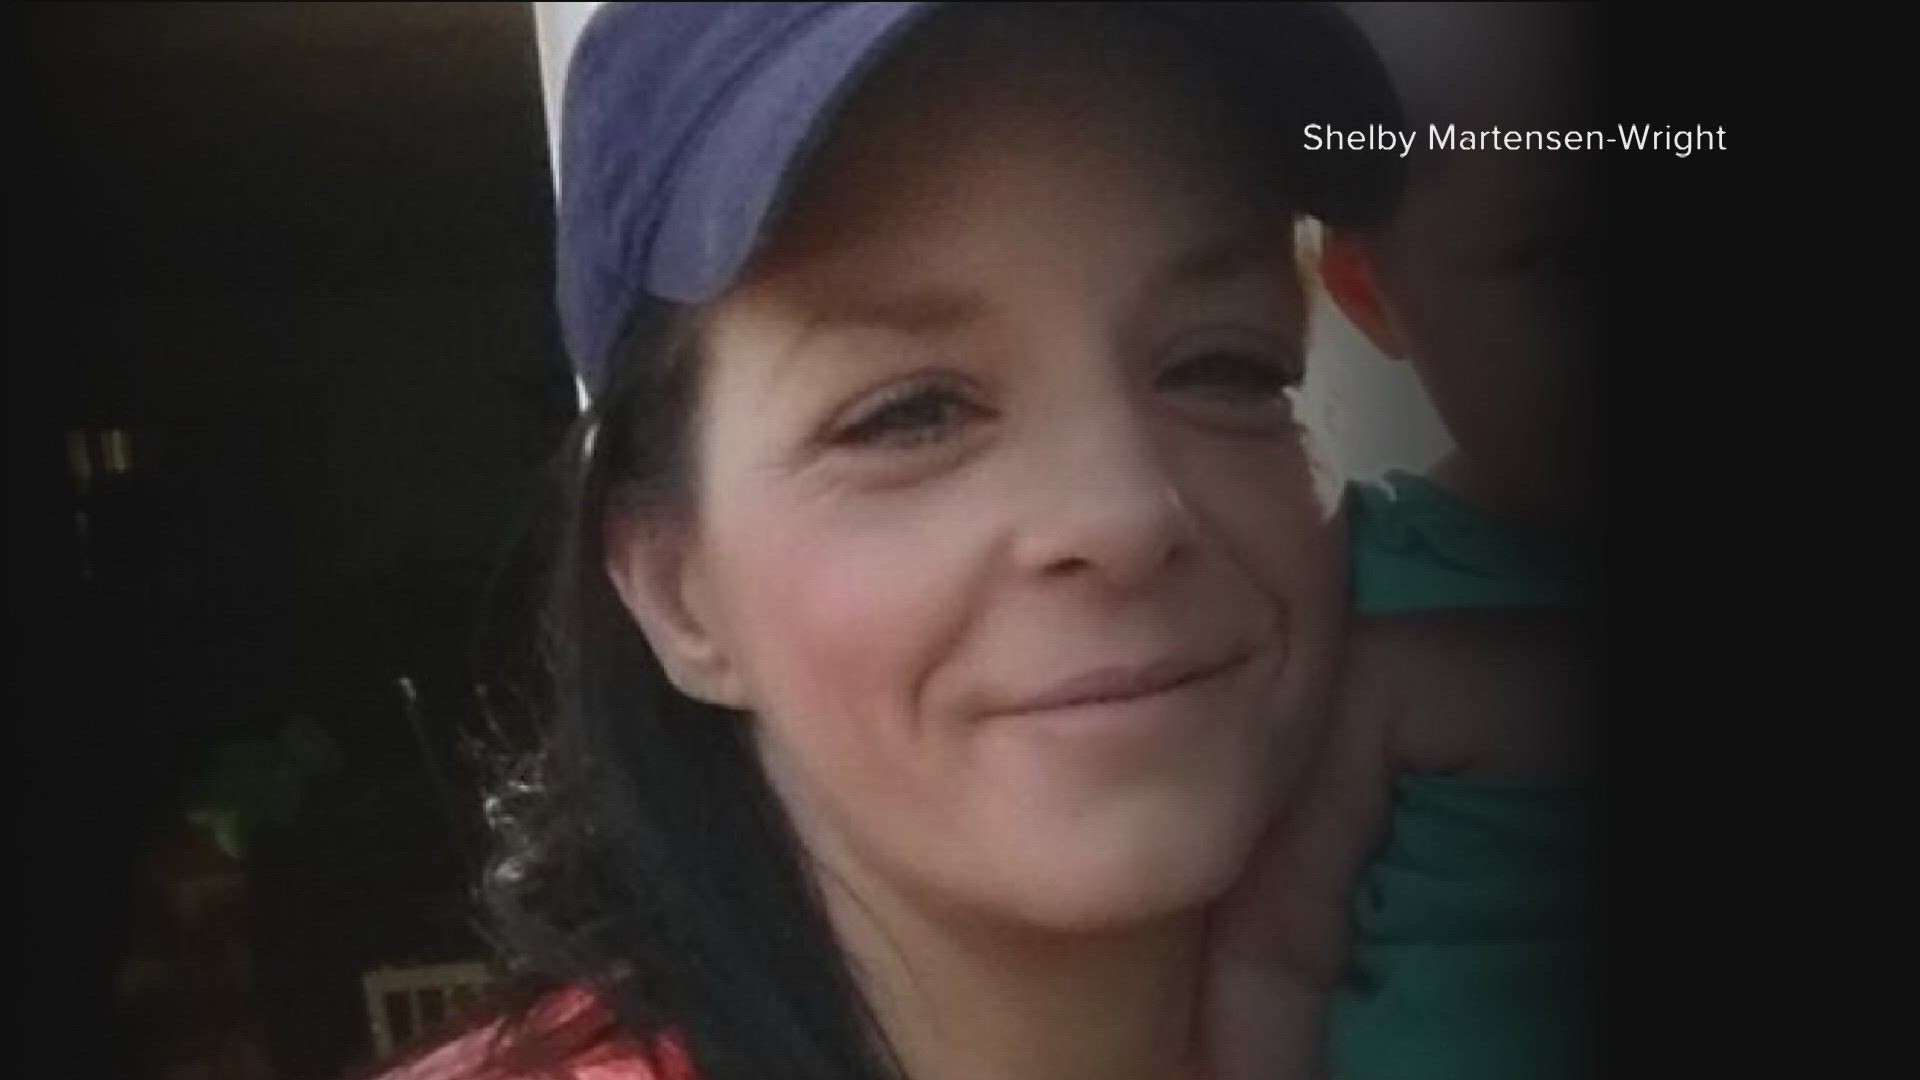 Jannell Martensen was reported missing in November. Police discovered her body on Dec. 14 inside a truck bed toolbox in Valleyford, Washington.